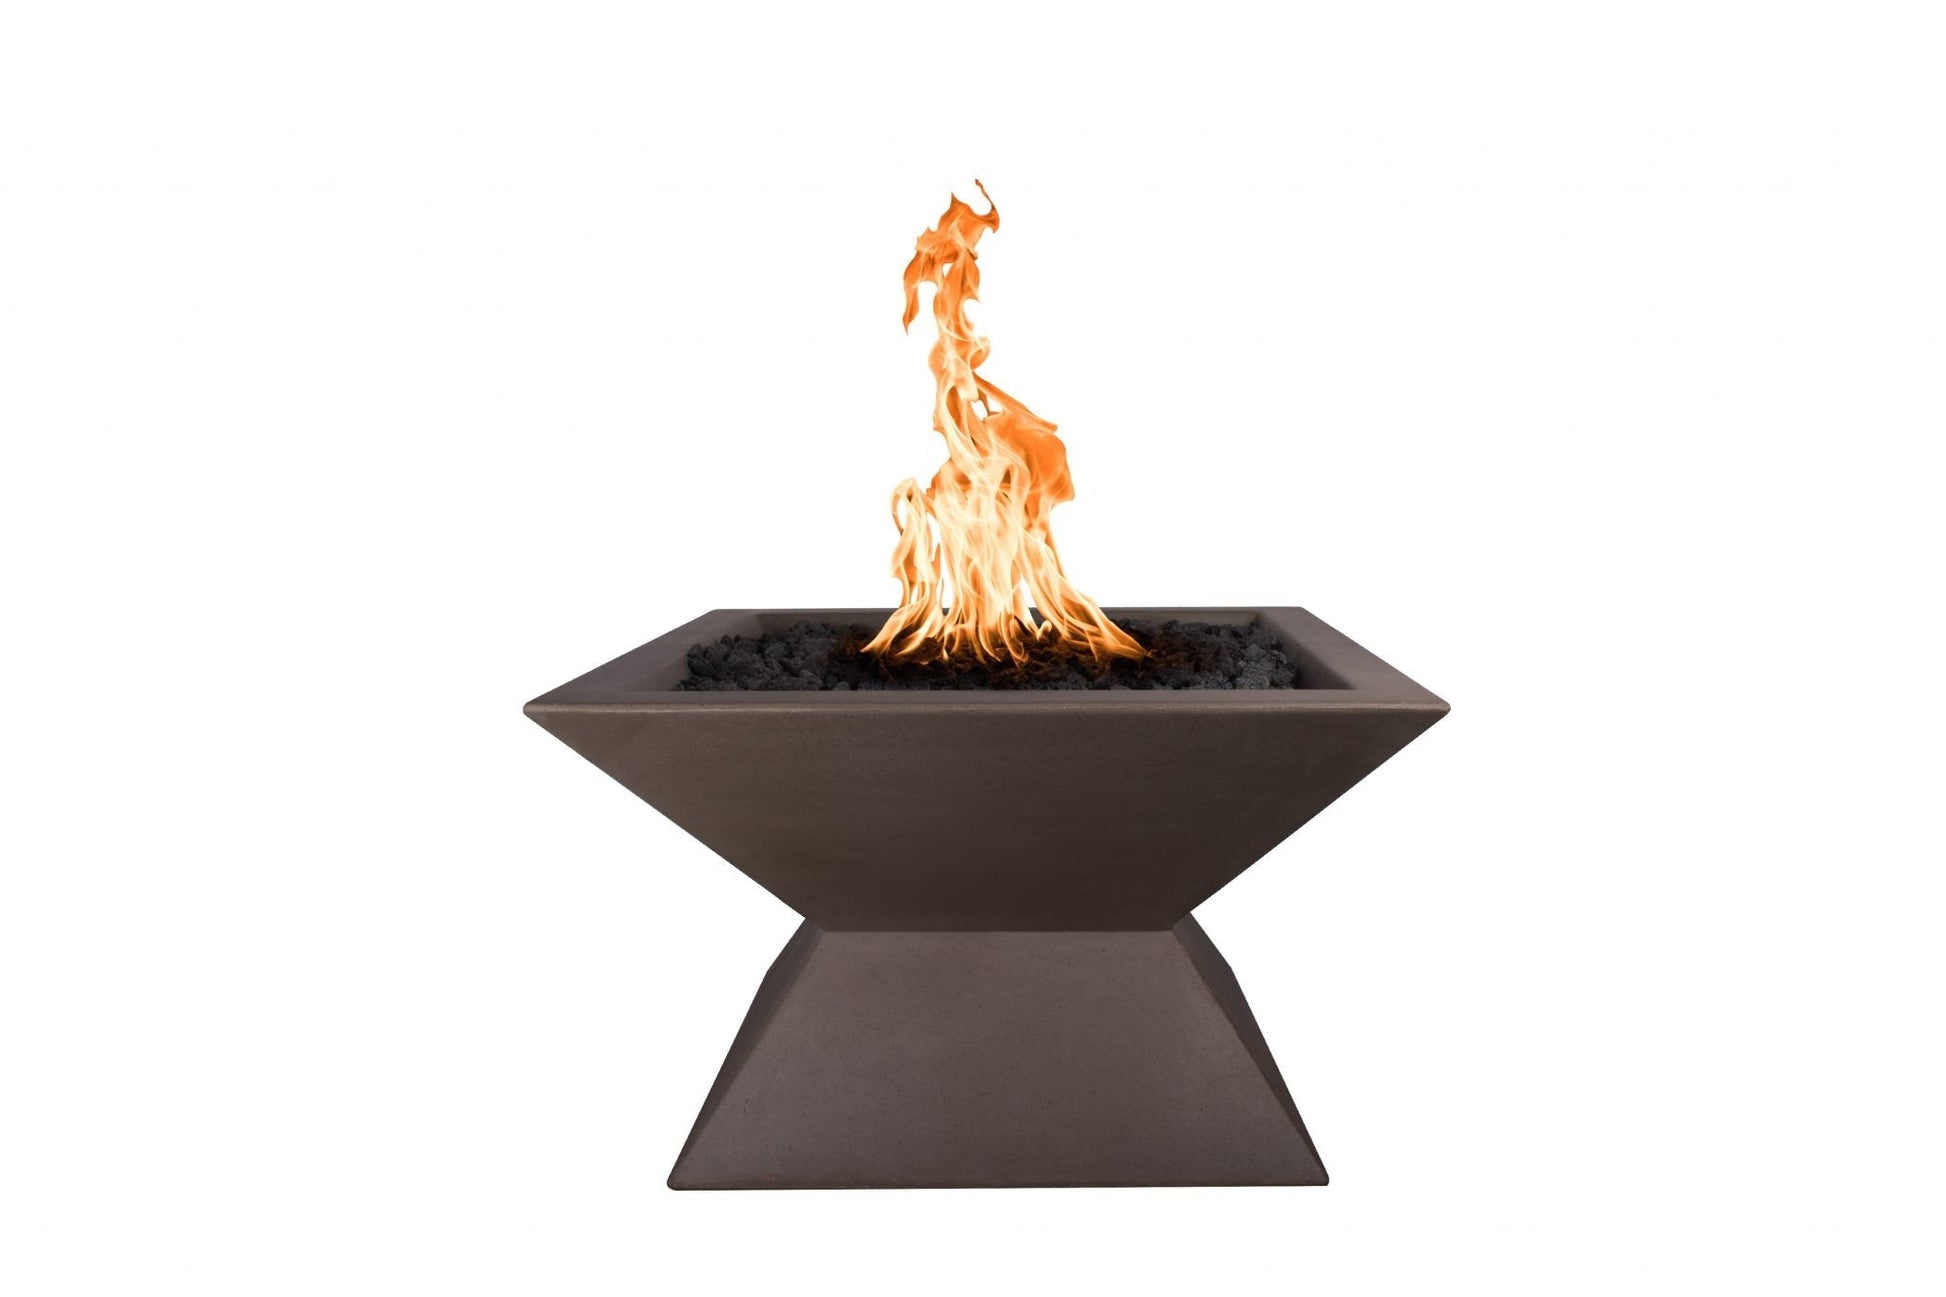 The Outdoor Plus Square Uxmal 30" Rustic White GFRC Concrete Natural Gas Fire Pit with Match Lit Ignition